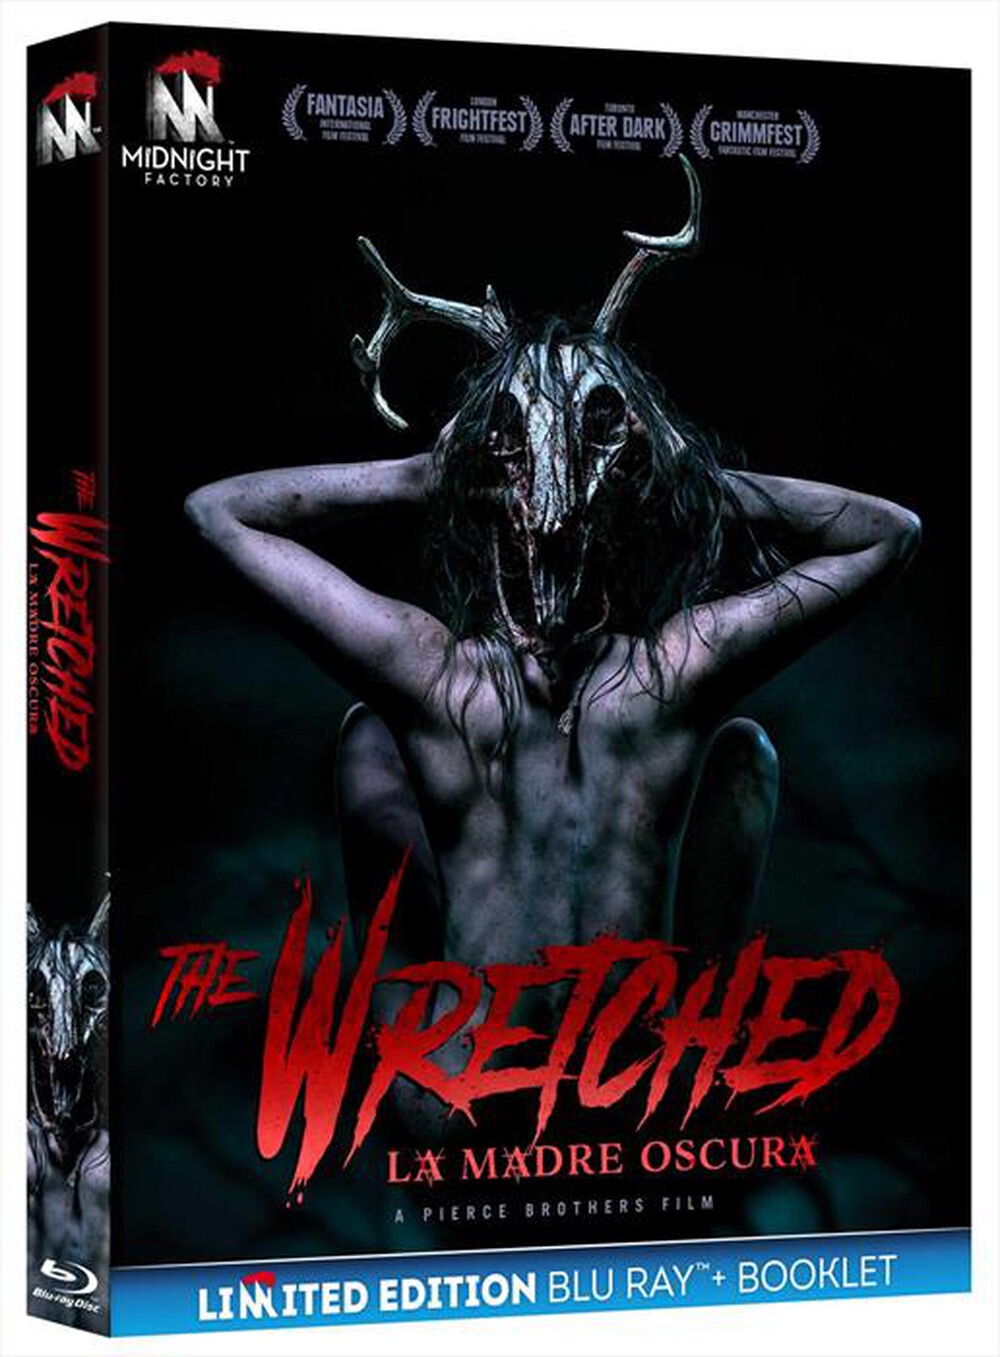 "Midnight Factory - Wretched (The) - La Madre Oscura (Blu-Ray+Bookle"